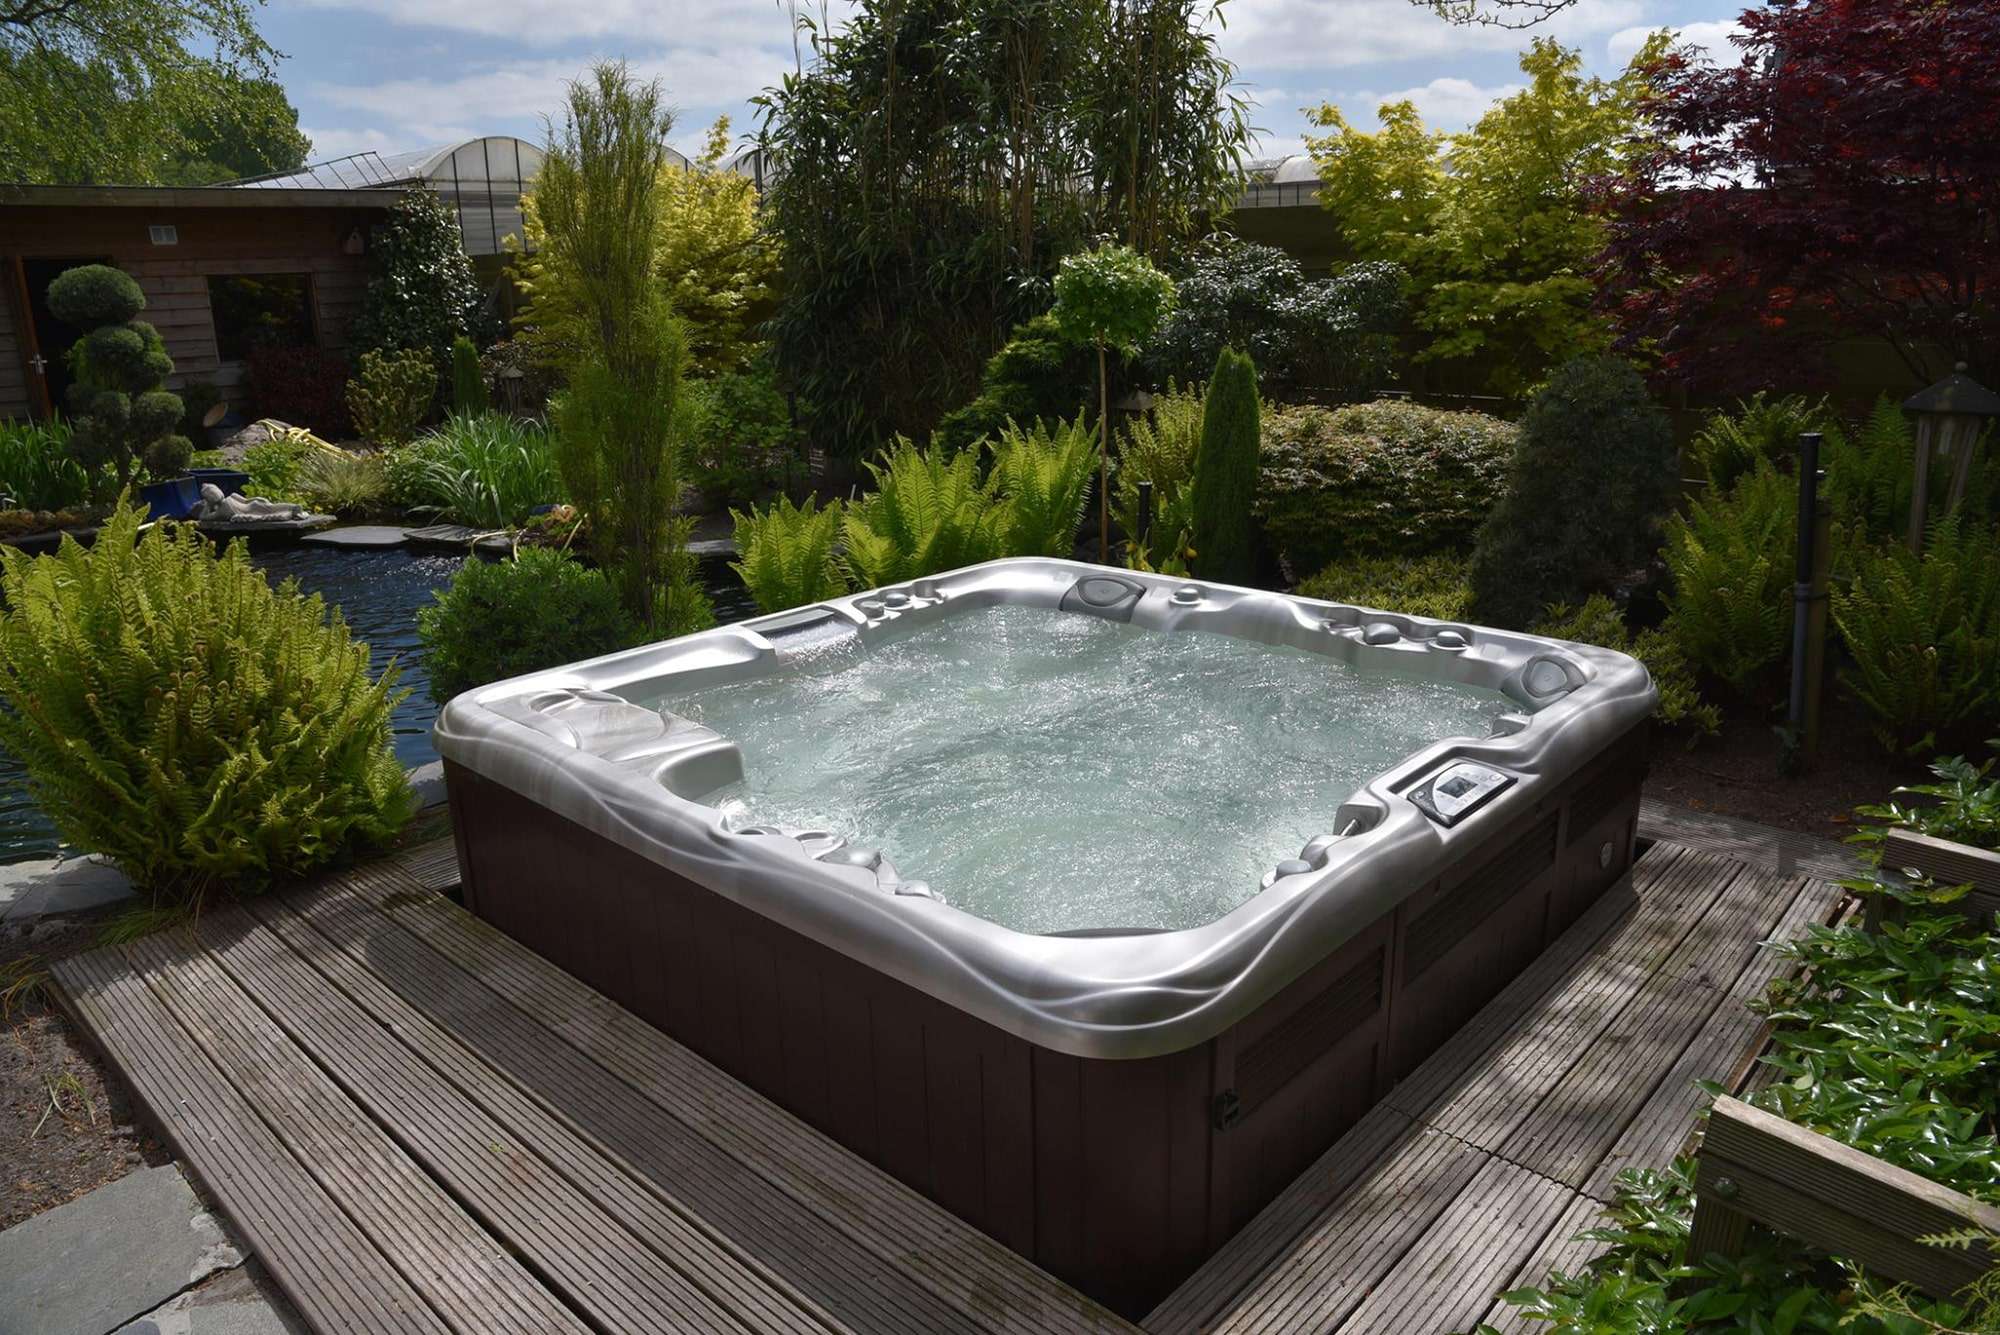 Build and Price Your Dream Hot Tub